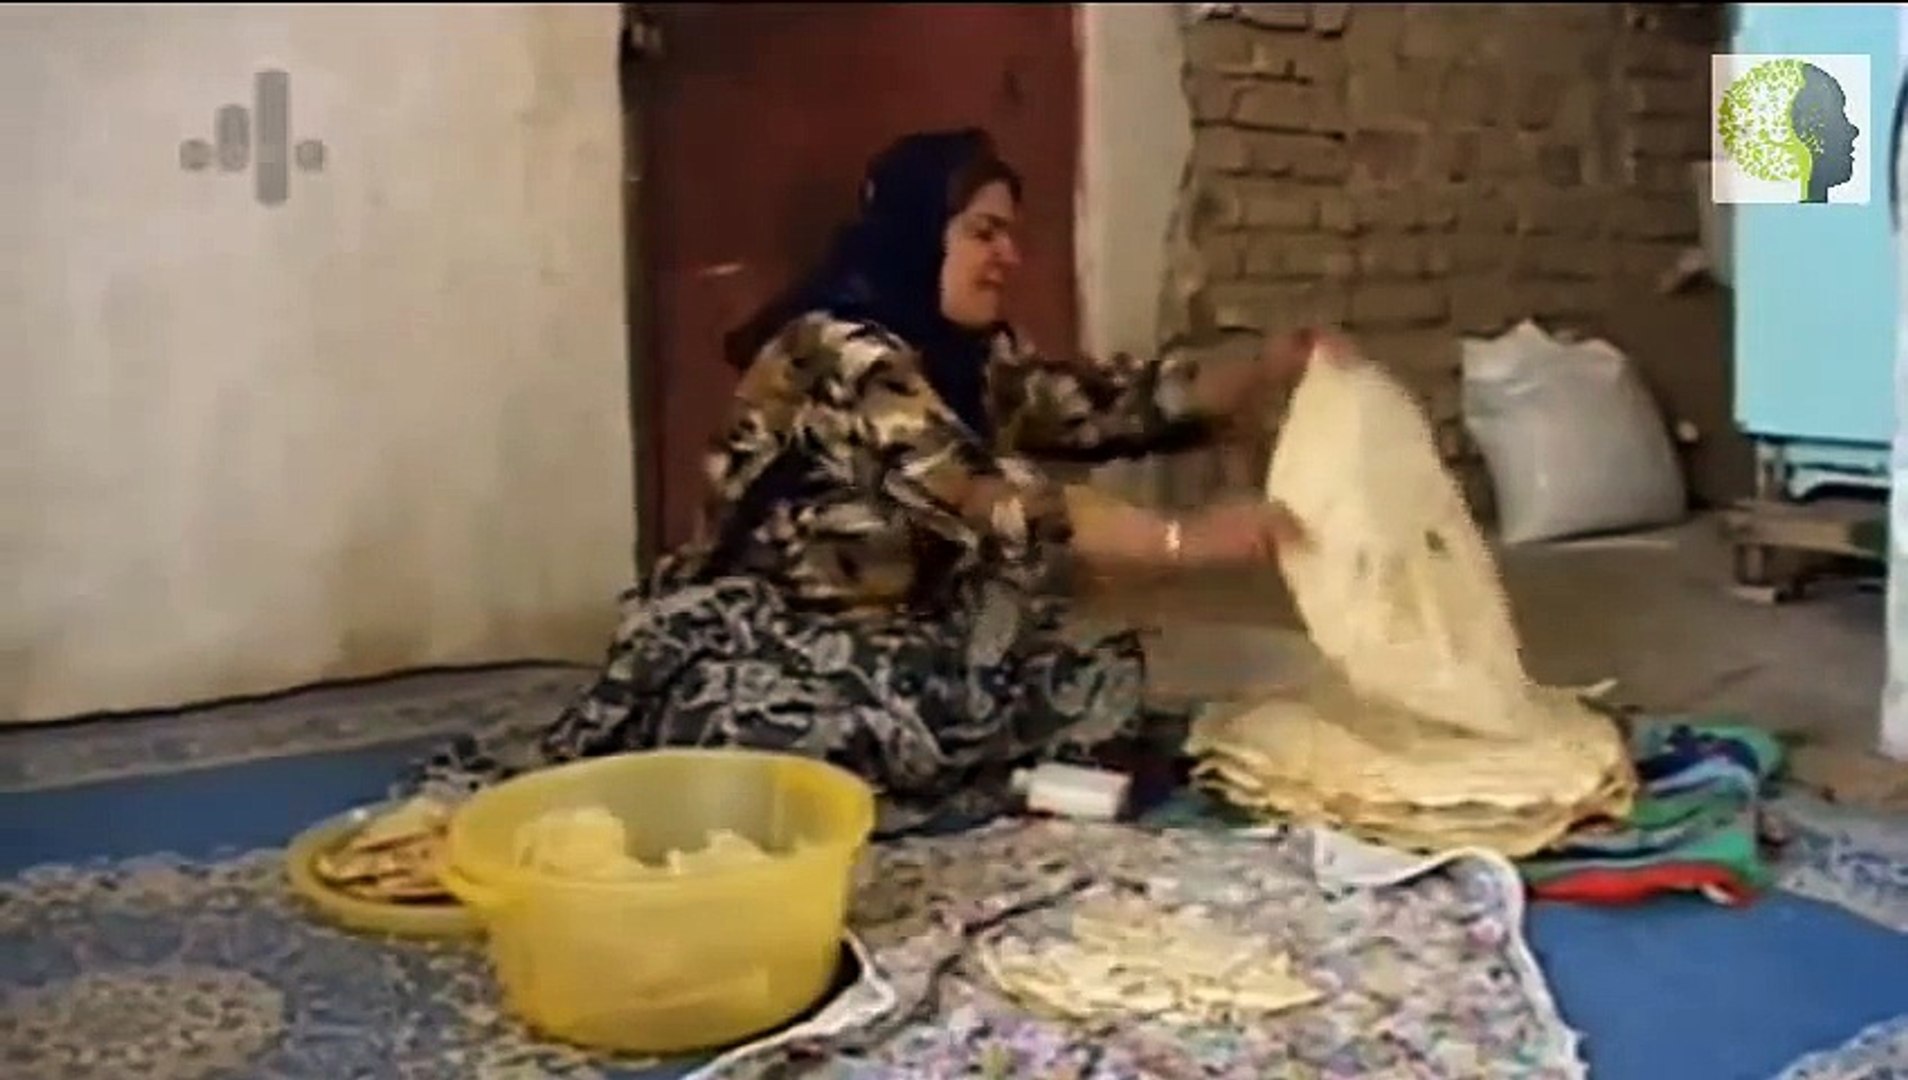 Four Wives and One Husband  Polygamy in Iran New Documentary - Must Watch - Latest News